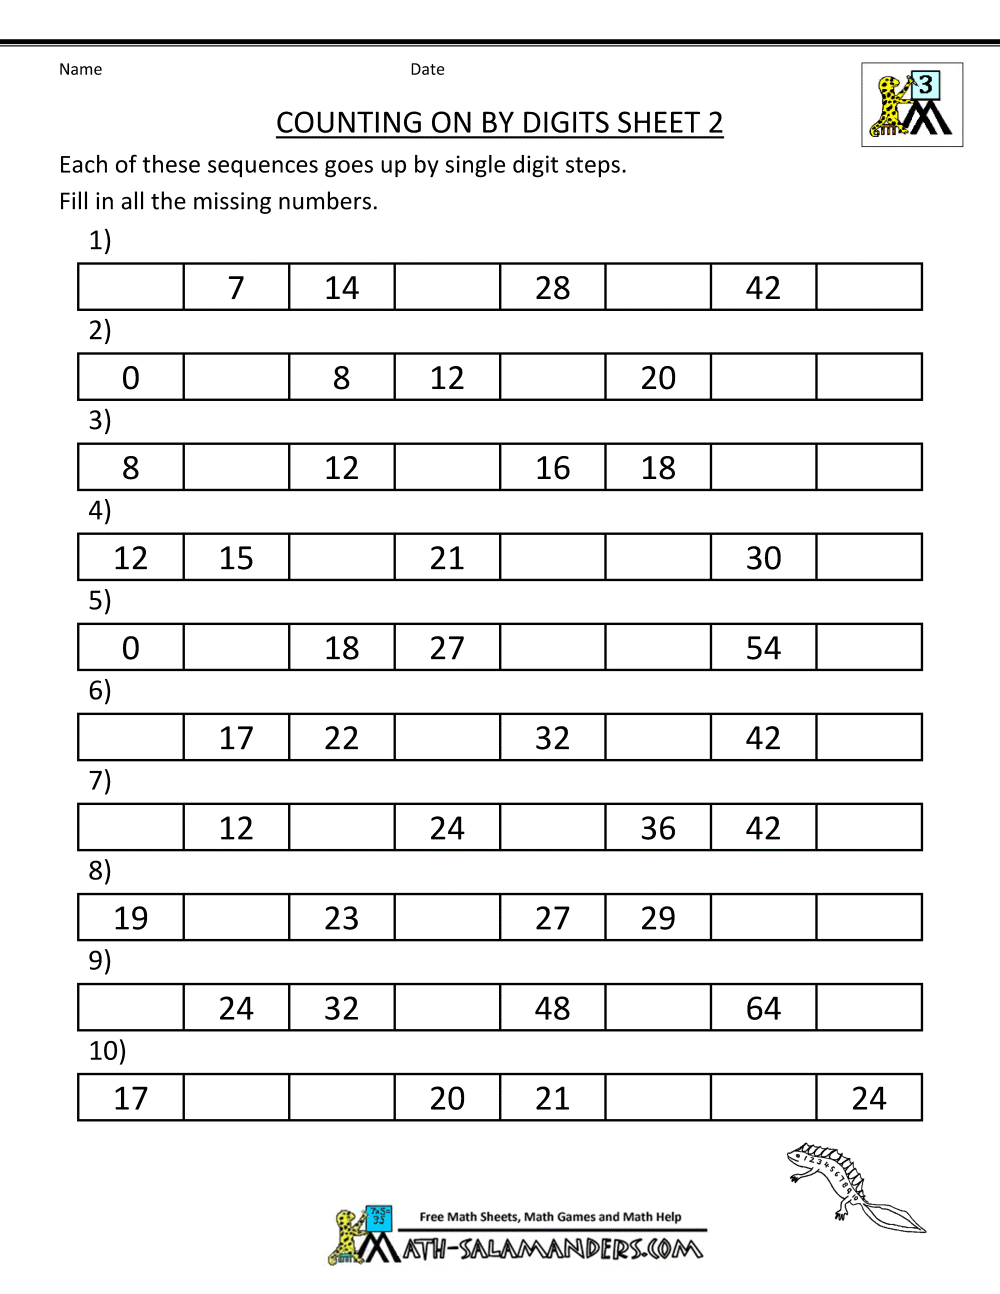 Counting on and back Worksheets 3rd Grade